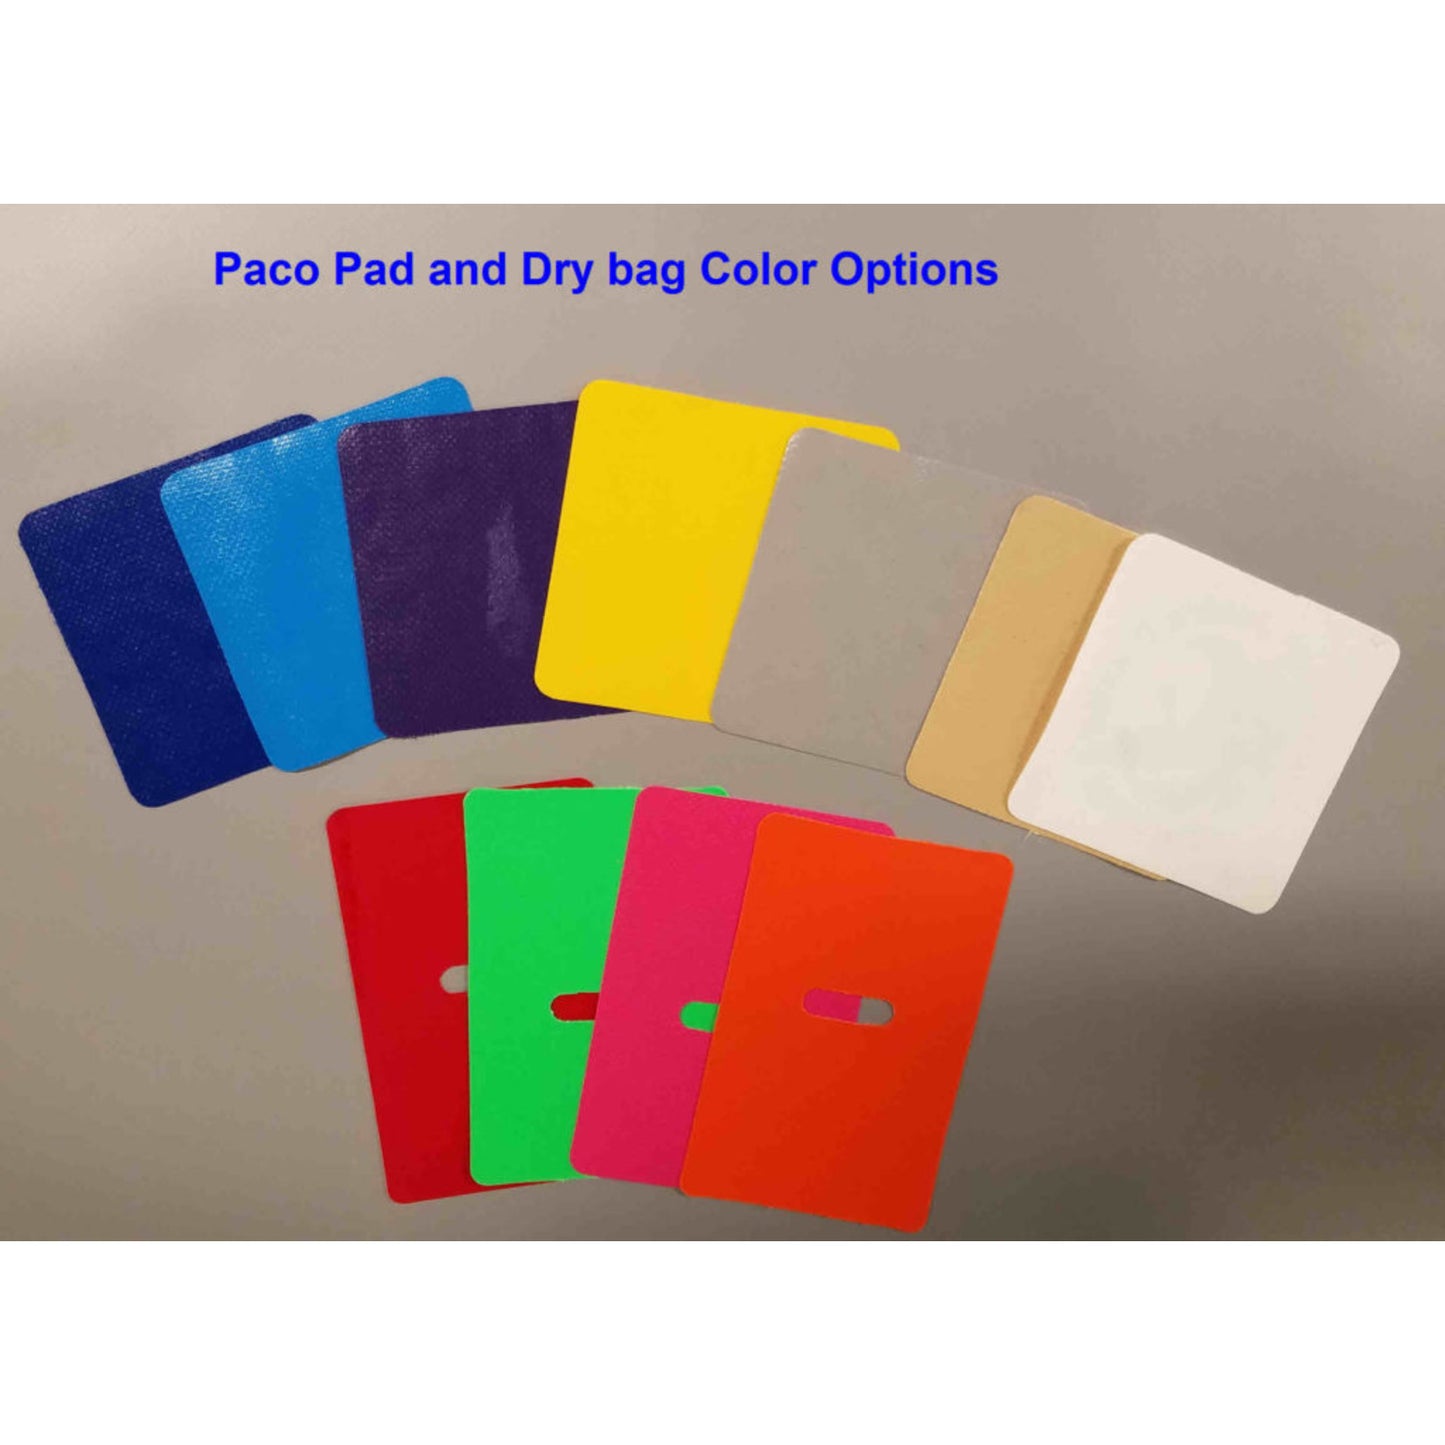 Waterproof Jacks Plastic dry bag with color options available.